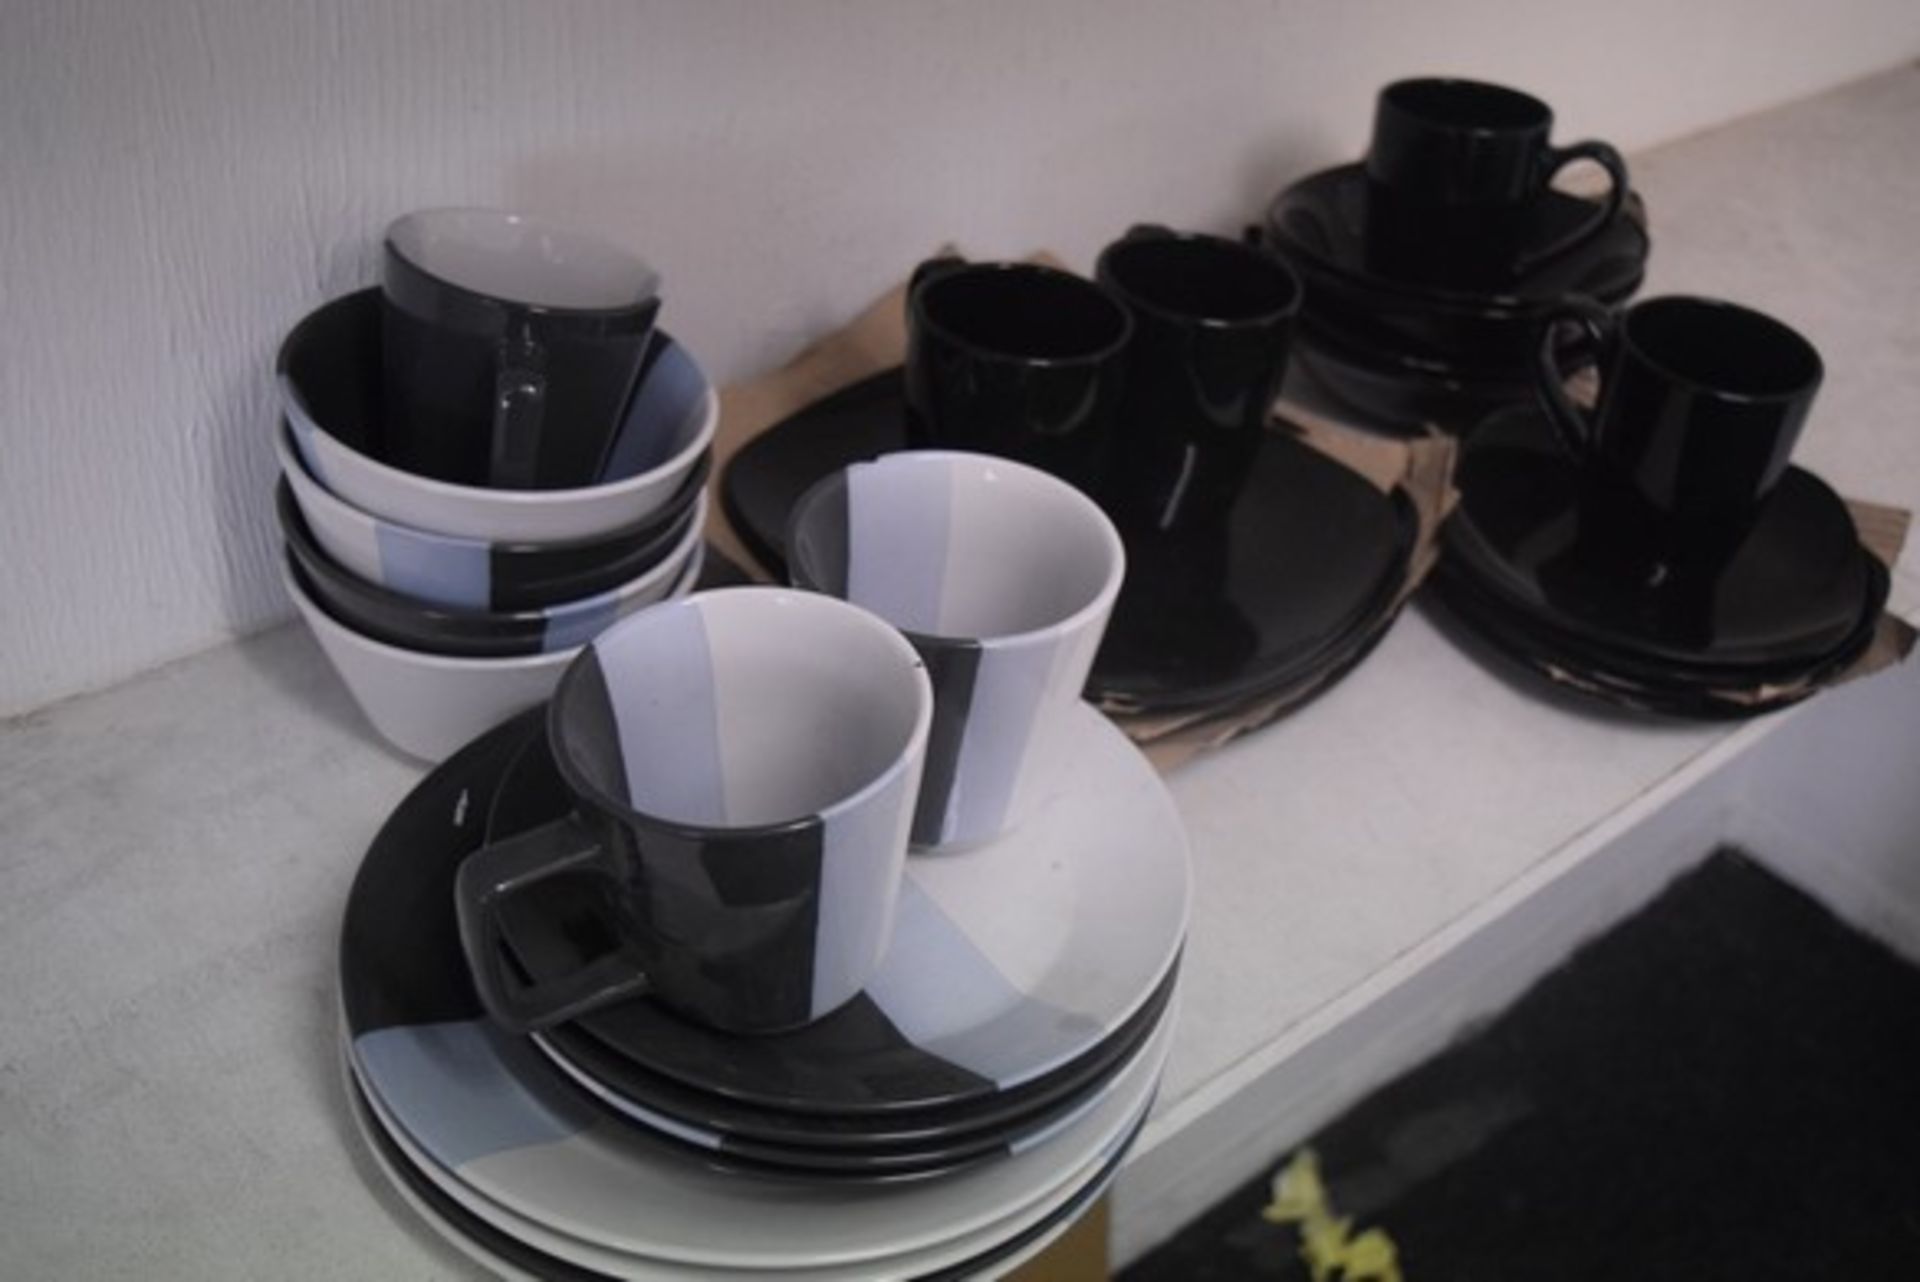 1 x BOXED BRAND NEW 16 PIECE DINNERWARE SET RRP £30 *PLEASE NOTE THAT THE BID PRICE IS MULTIPLIED BY